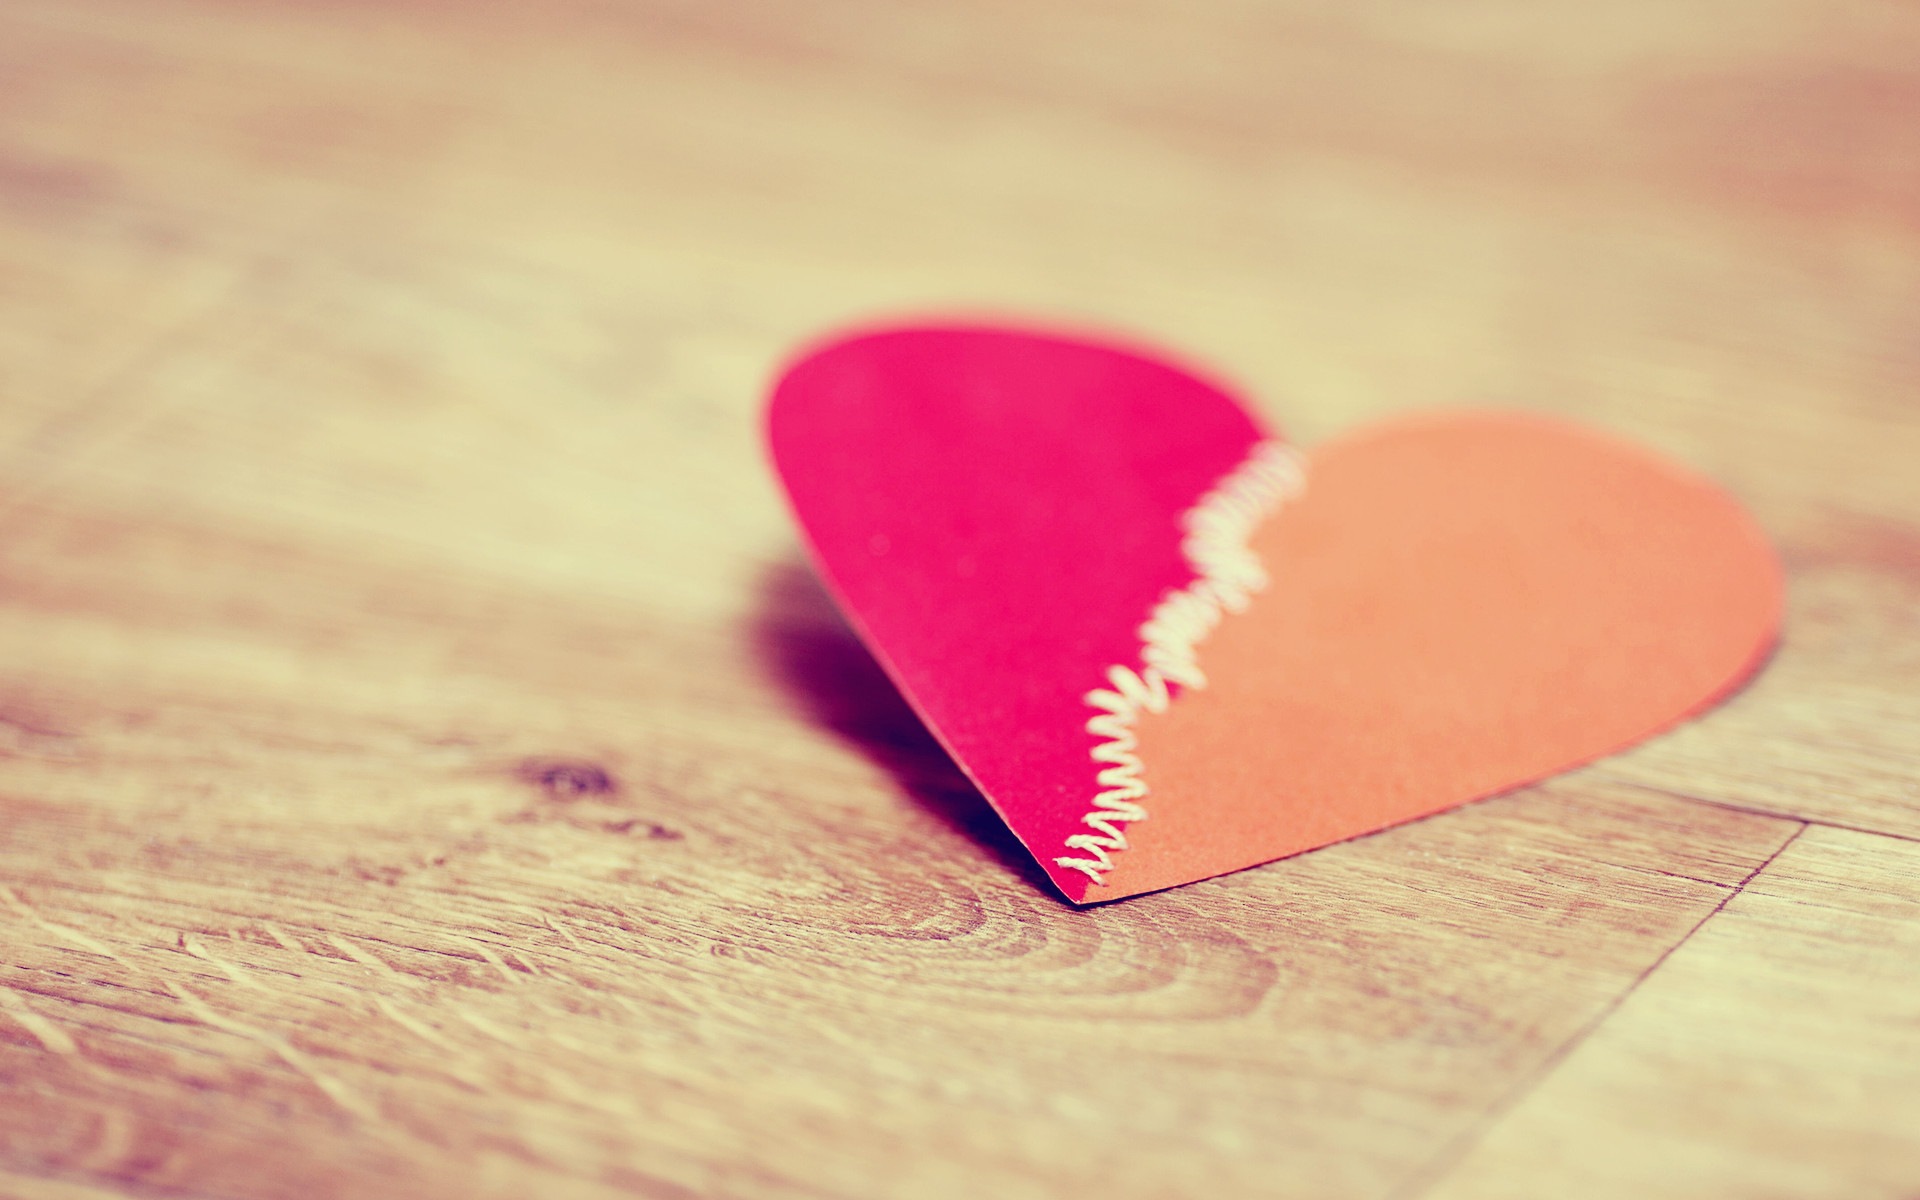 The theme of love, creative heart-shaped HD wallpapers #5 - 1920x1200